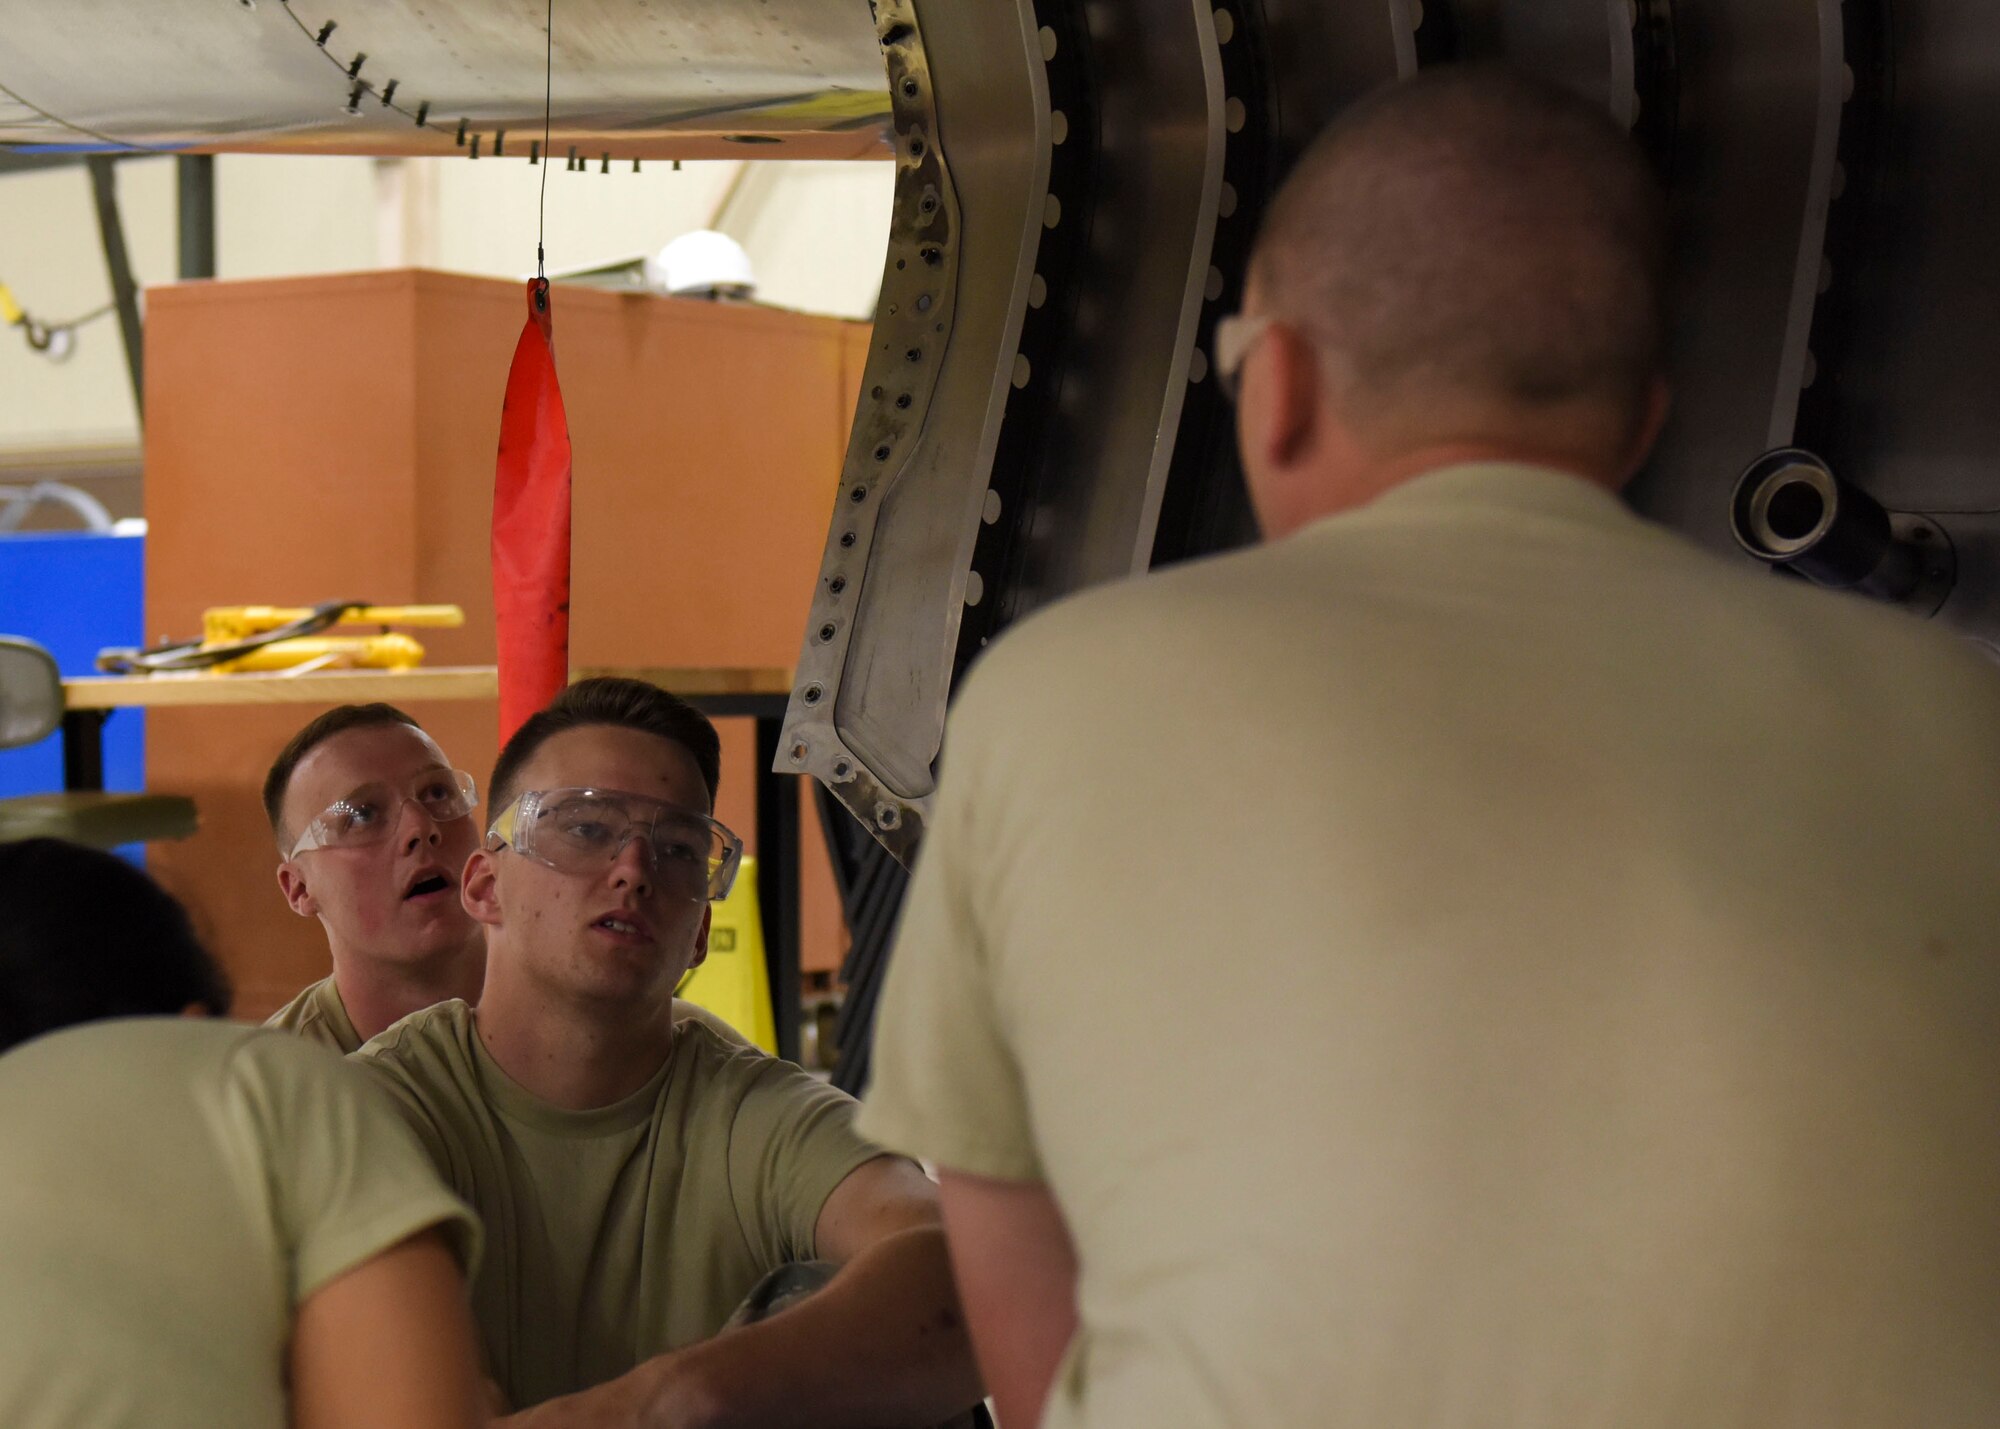 Airman 1st Class Daniel Hawkins (center), 361st Training Squadron aerospace propulsion apprentice, discusses the various engine components of a McDonnell Douglas F-15 Eagle with Staff Sgt. Matthew Hansen (right), 361st Training Squadron aerospace ground propulsion instructor, at Sheppard Air Force Base, Texas, Jun. 10, 2019. Hawkins, an ACE award recipient, received a score of 100% on all of his progress checks and block tests during his training course. Hawkins enjoys the challenges that along come with his job. (U.S. Air Force photo by Senior Airman Ilyana A. Escalona)